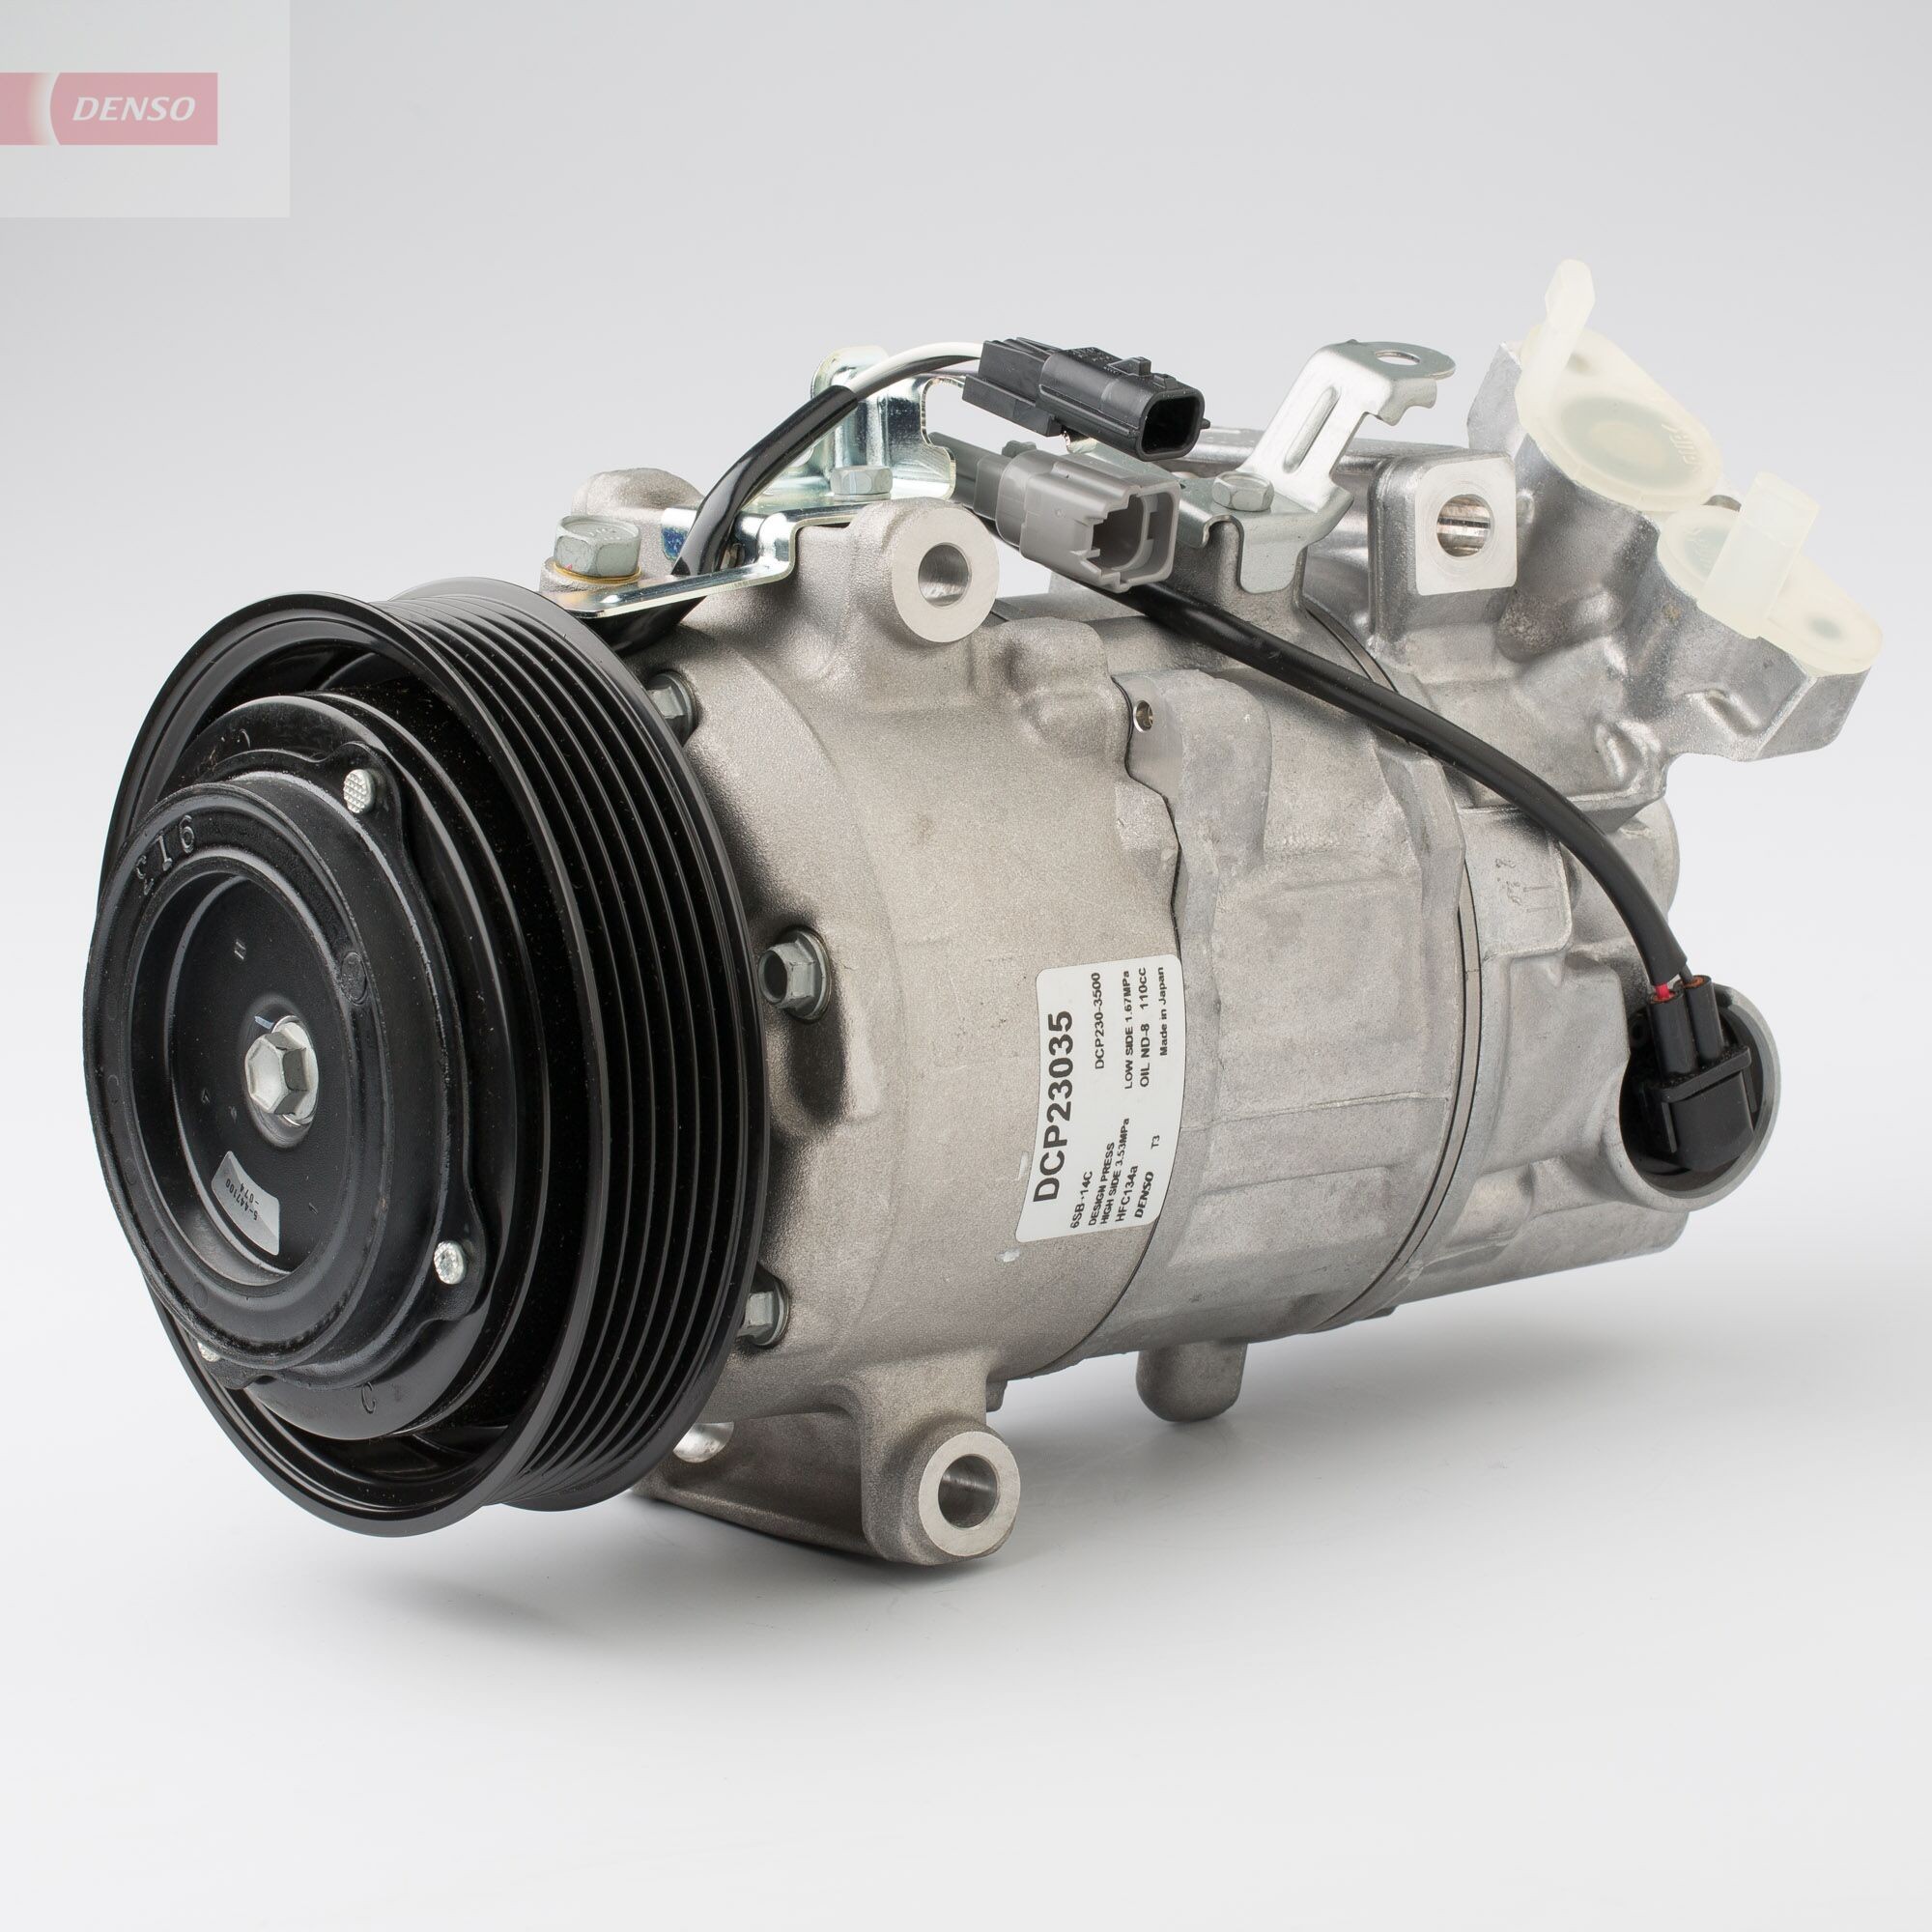 DCP23035 DENSO Air con compressor MAZDA 6SBL14C, 12V, PAG 46, R 134a, with magnetic clutch